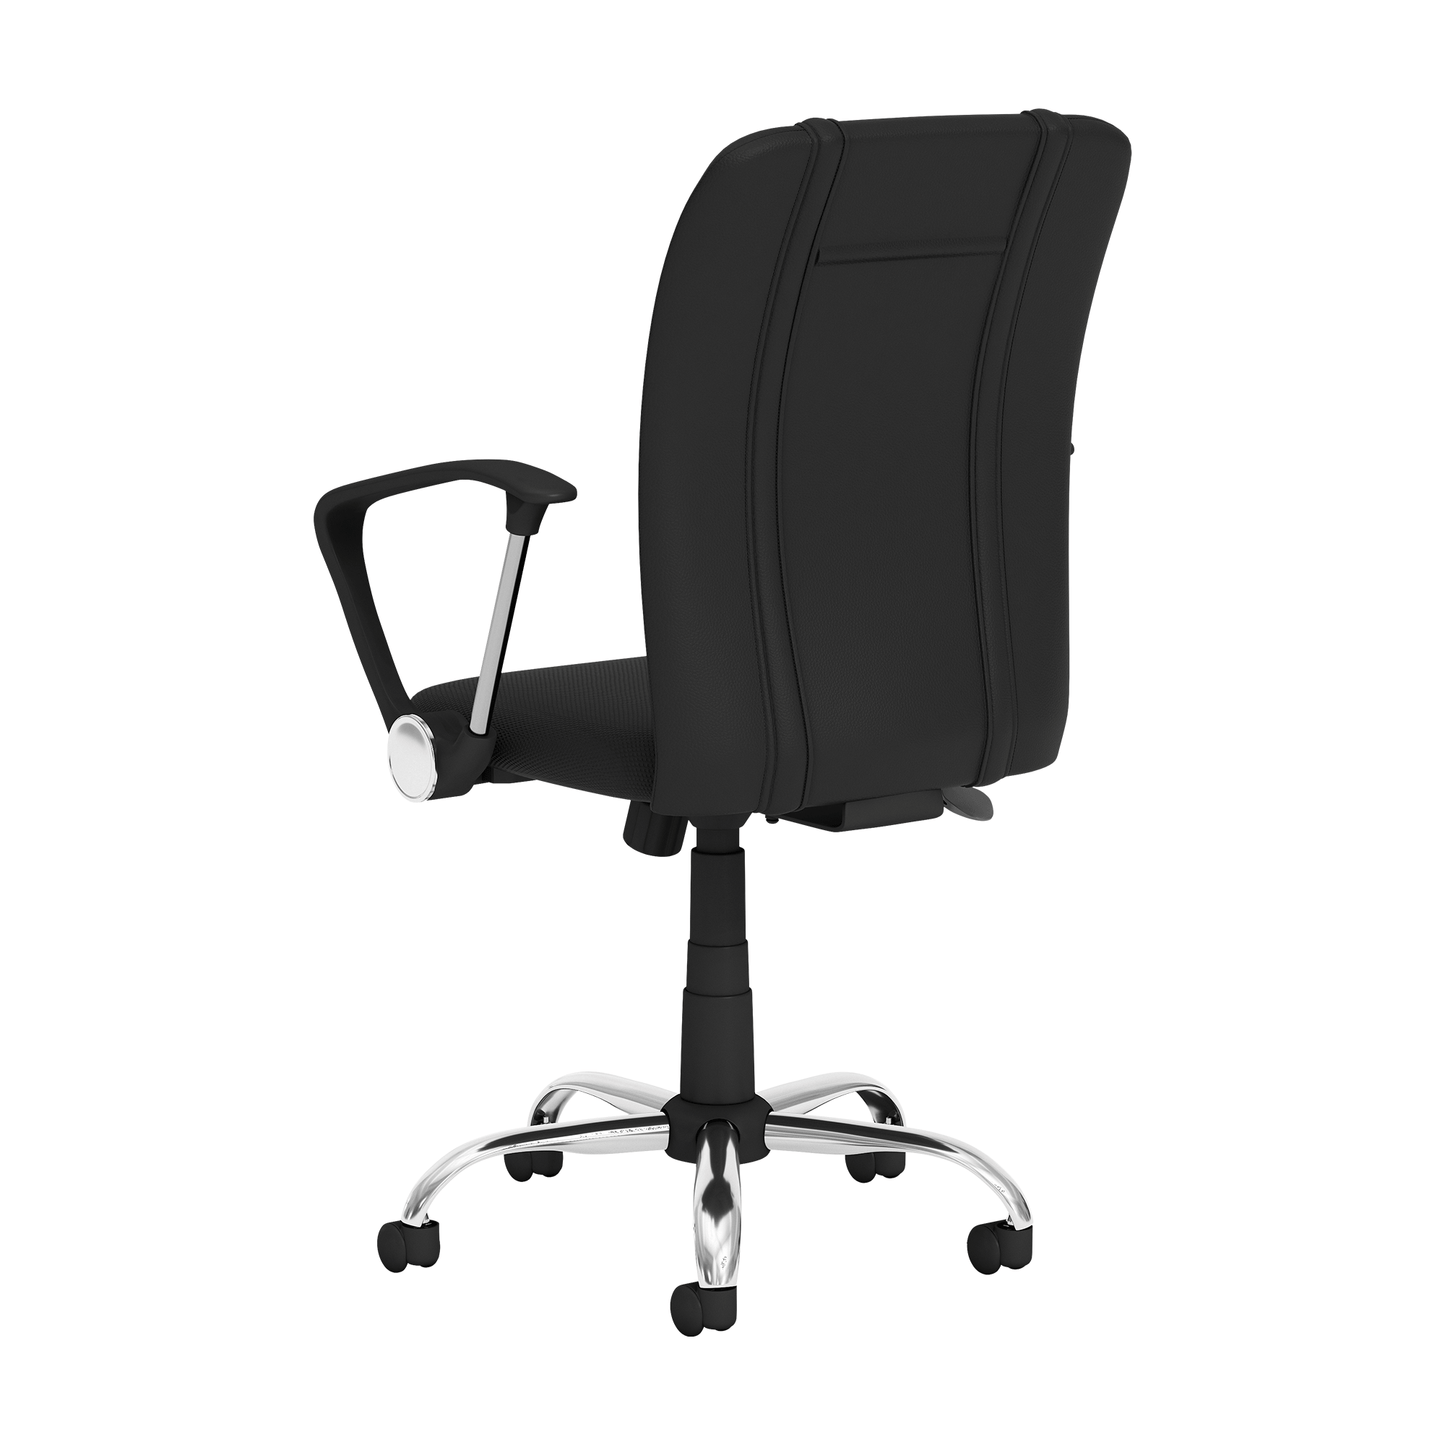 Curve Task Chair with New Orleans Pelicans Secondary